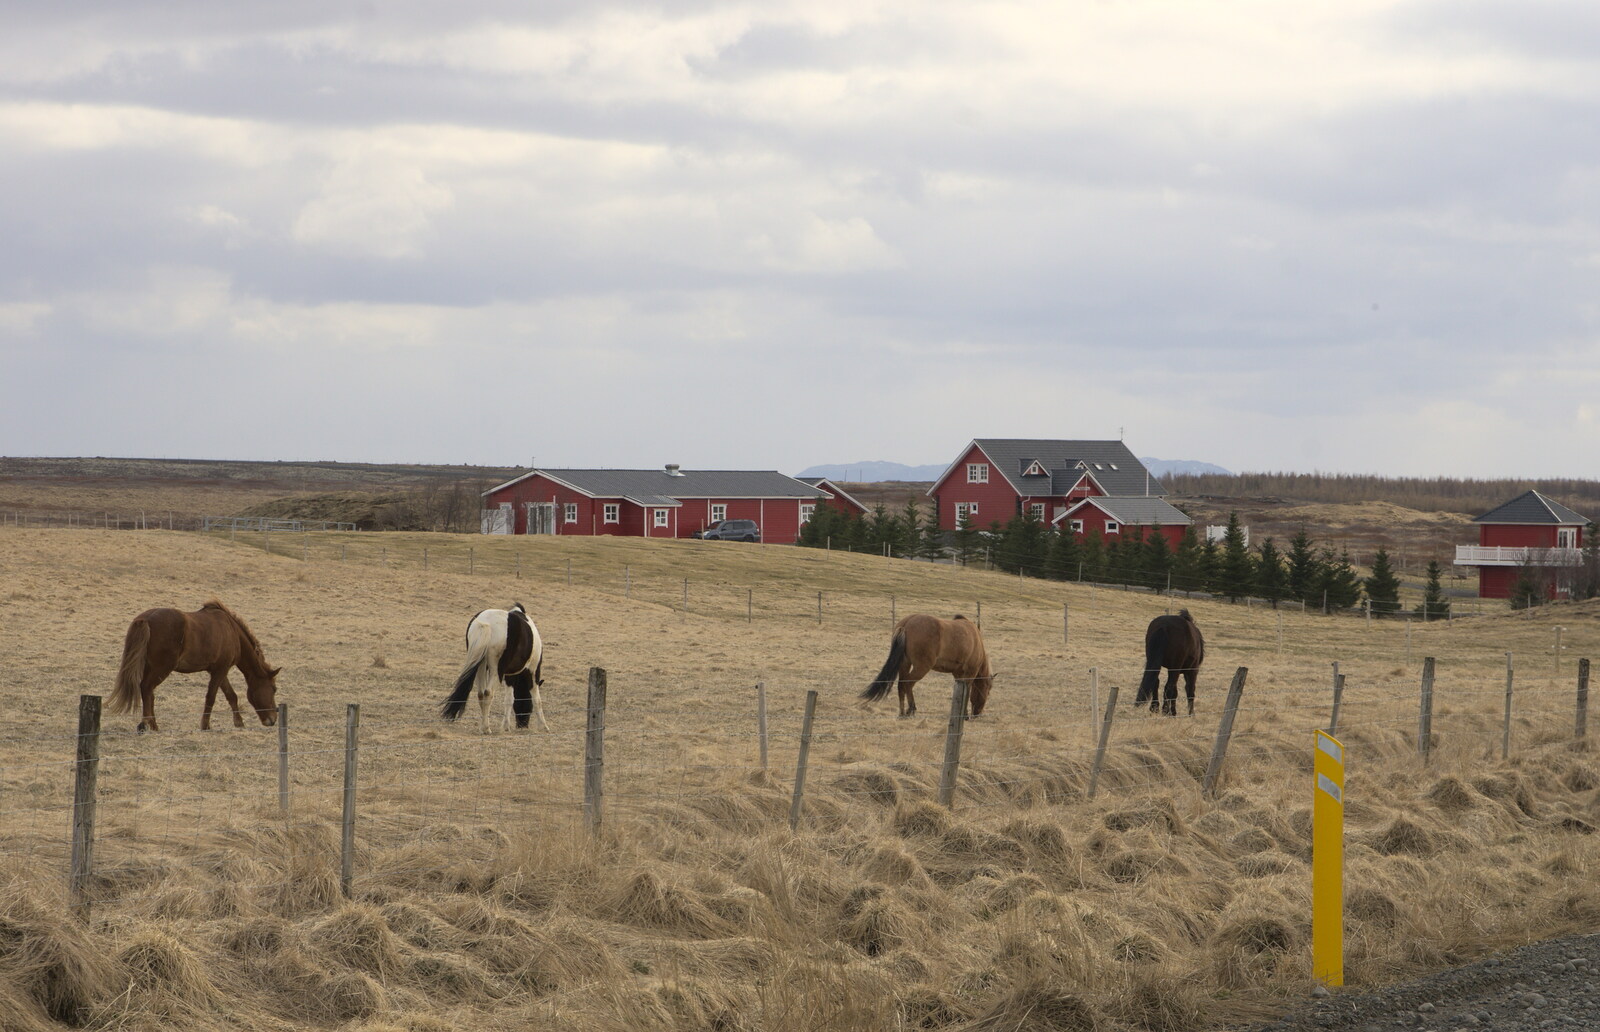 Icelandic ponies on a farm from The Golden Circle of Ísland, Iceland - 22nd April 2017